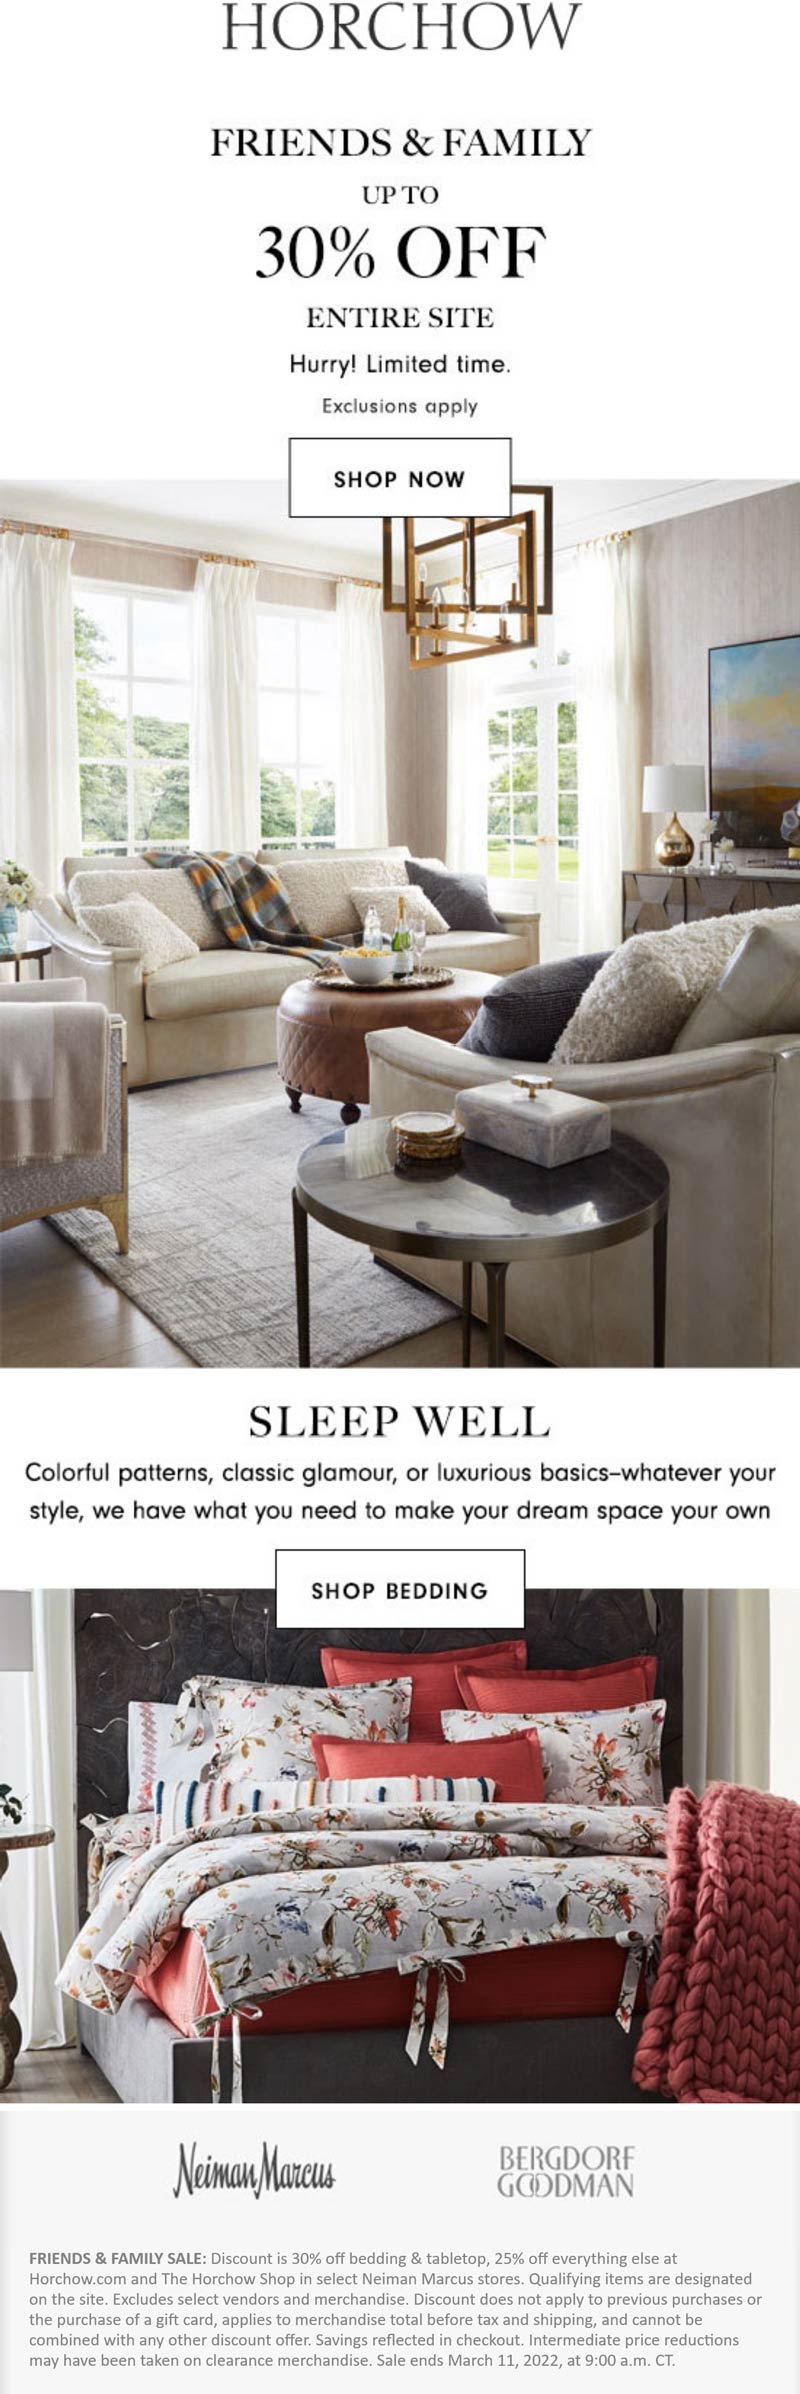 Horchow stores Coupon  25-30% off everything at Neiman Marcus Horchow furniture & home goods #horchow 